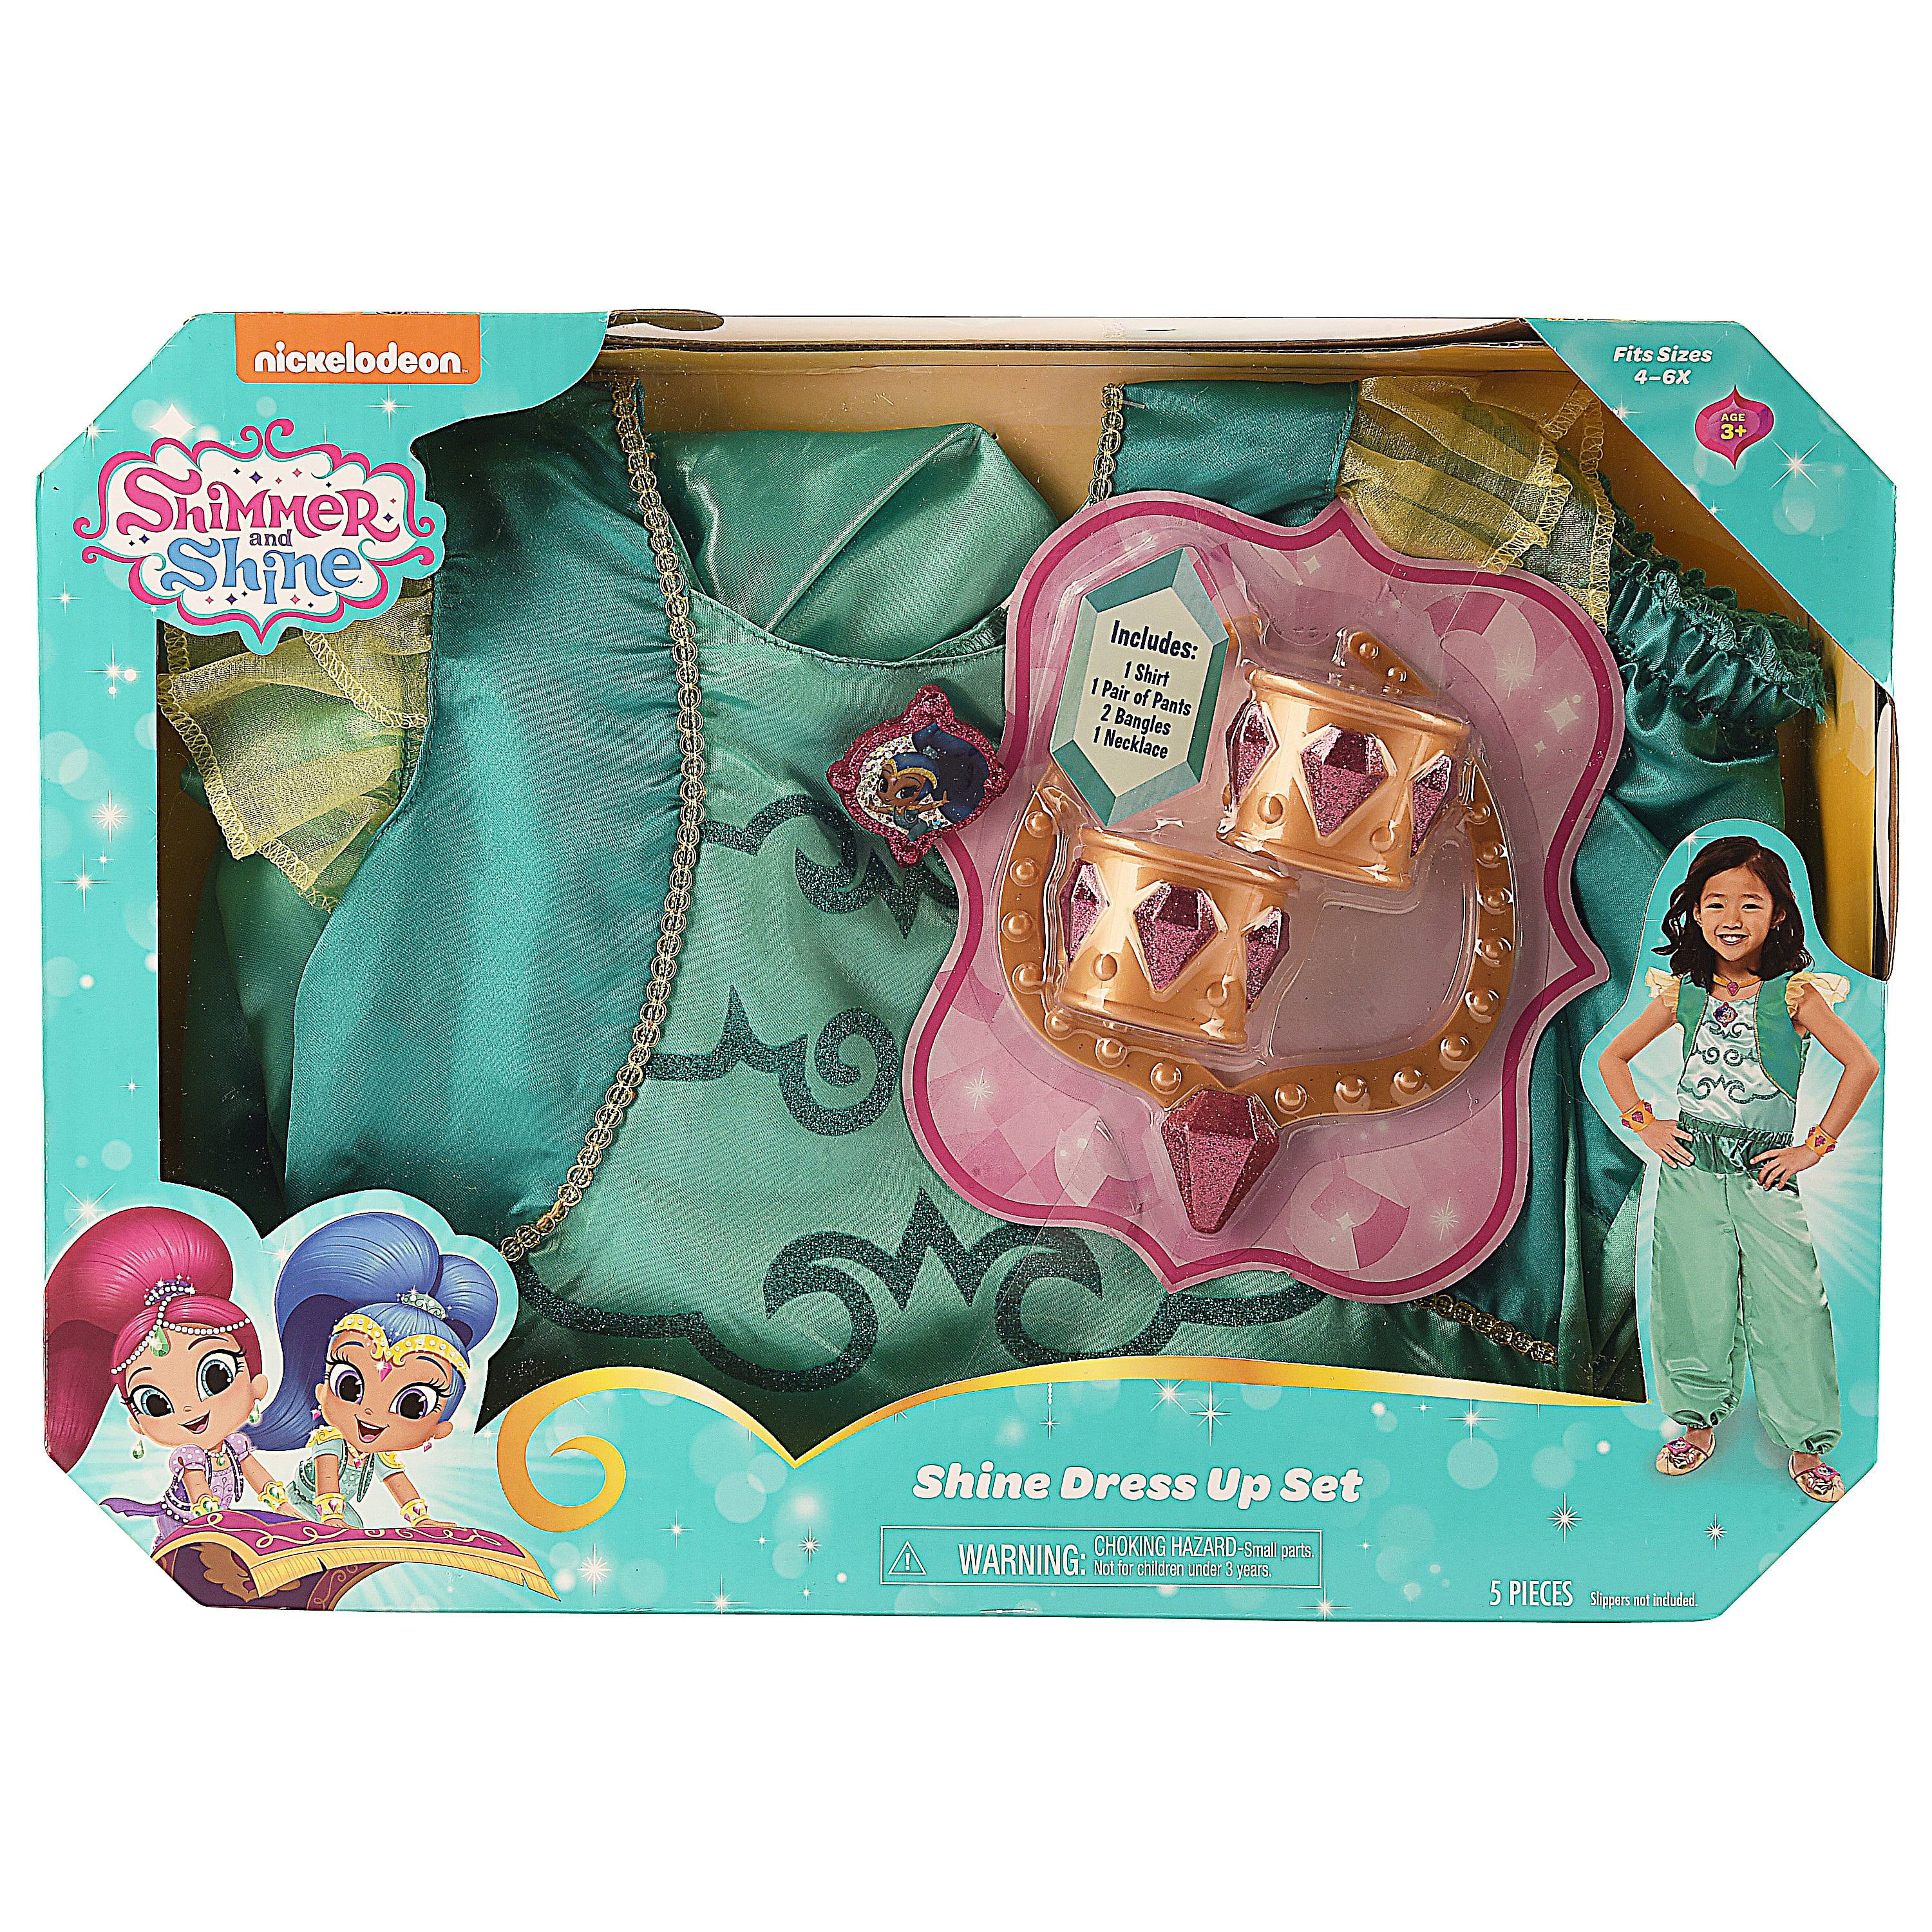 Shimmer and Shine Outfit Drressing Up Costume Turquoise or Plum World Book Day 